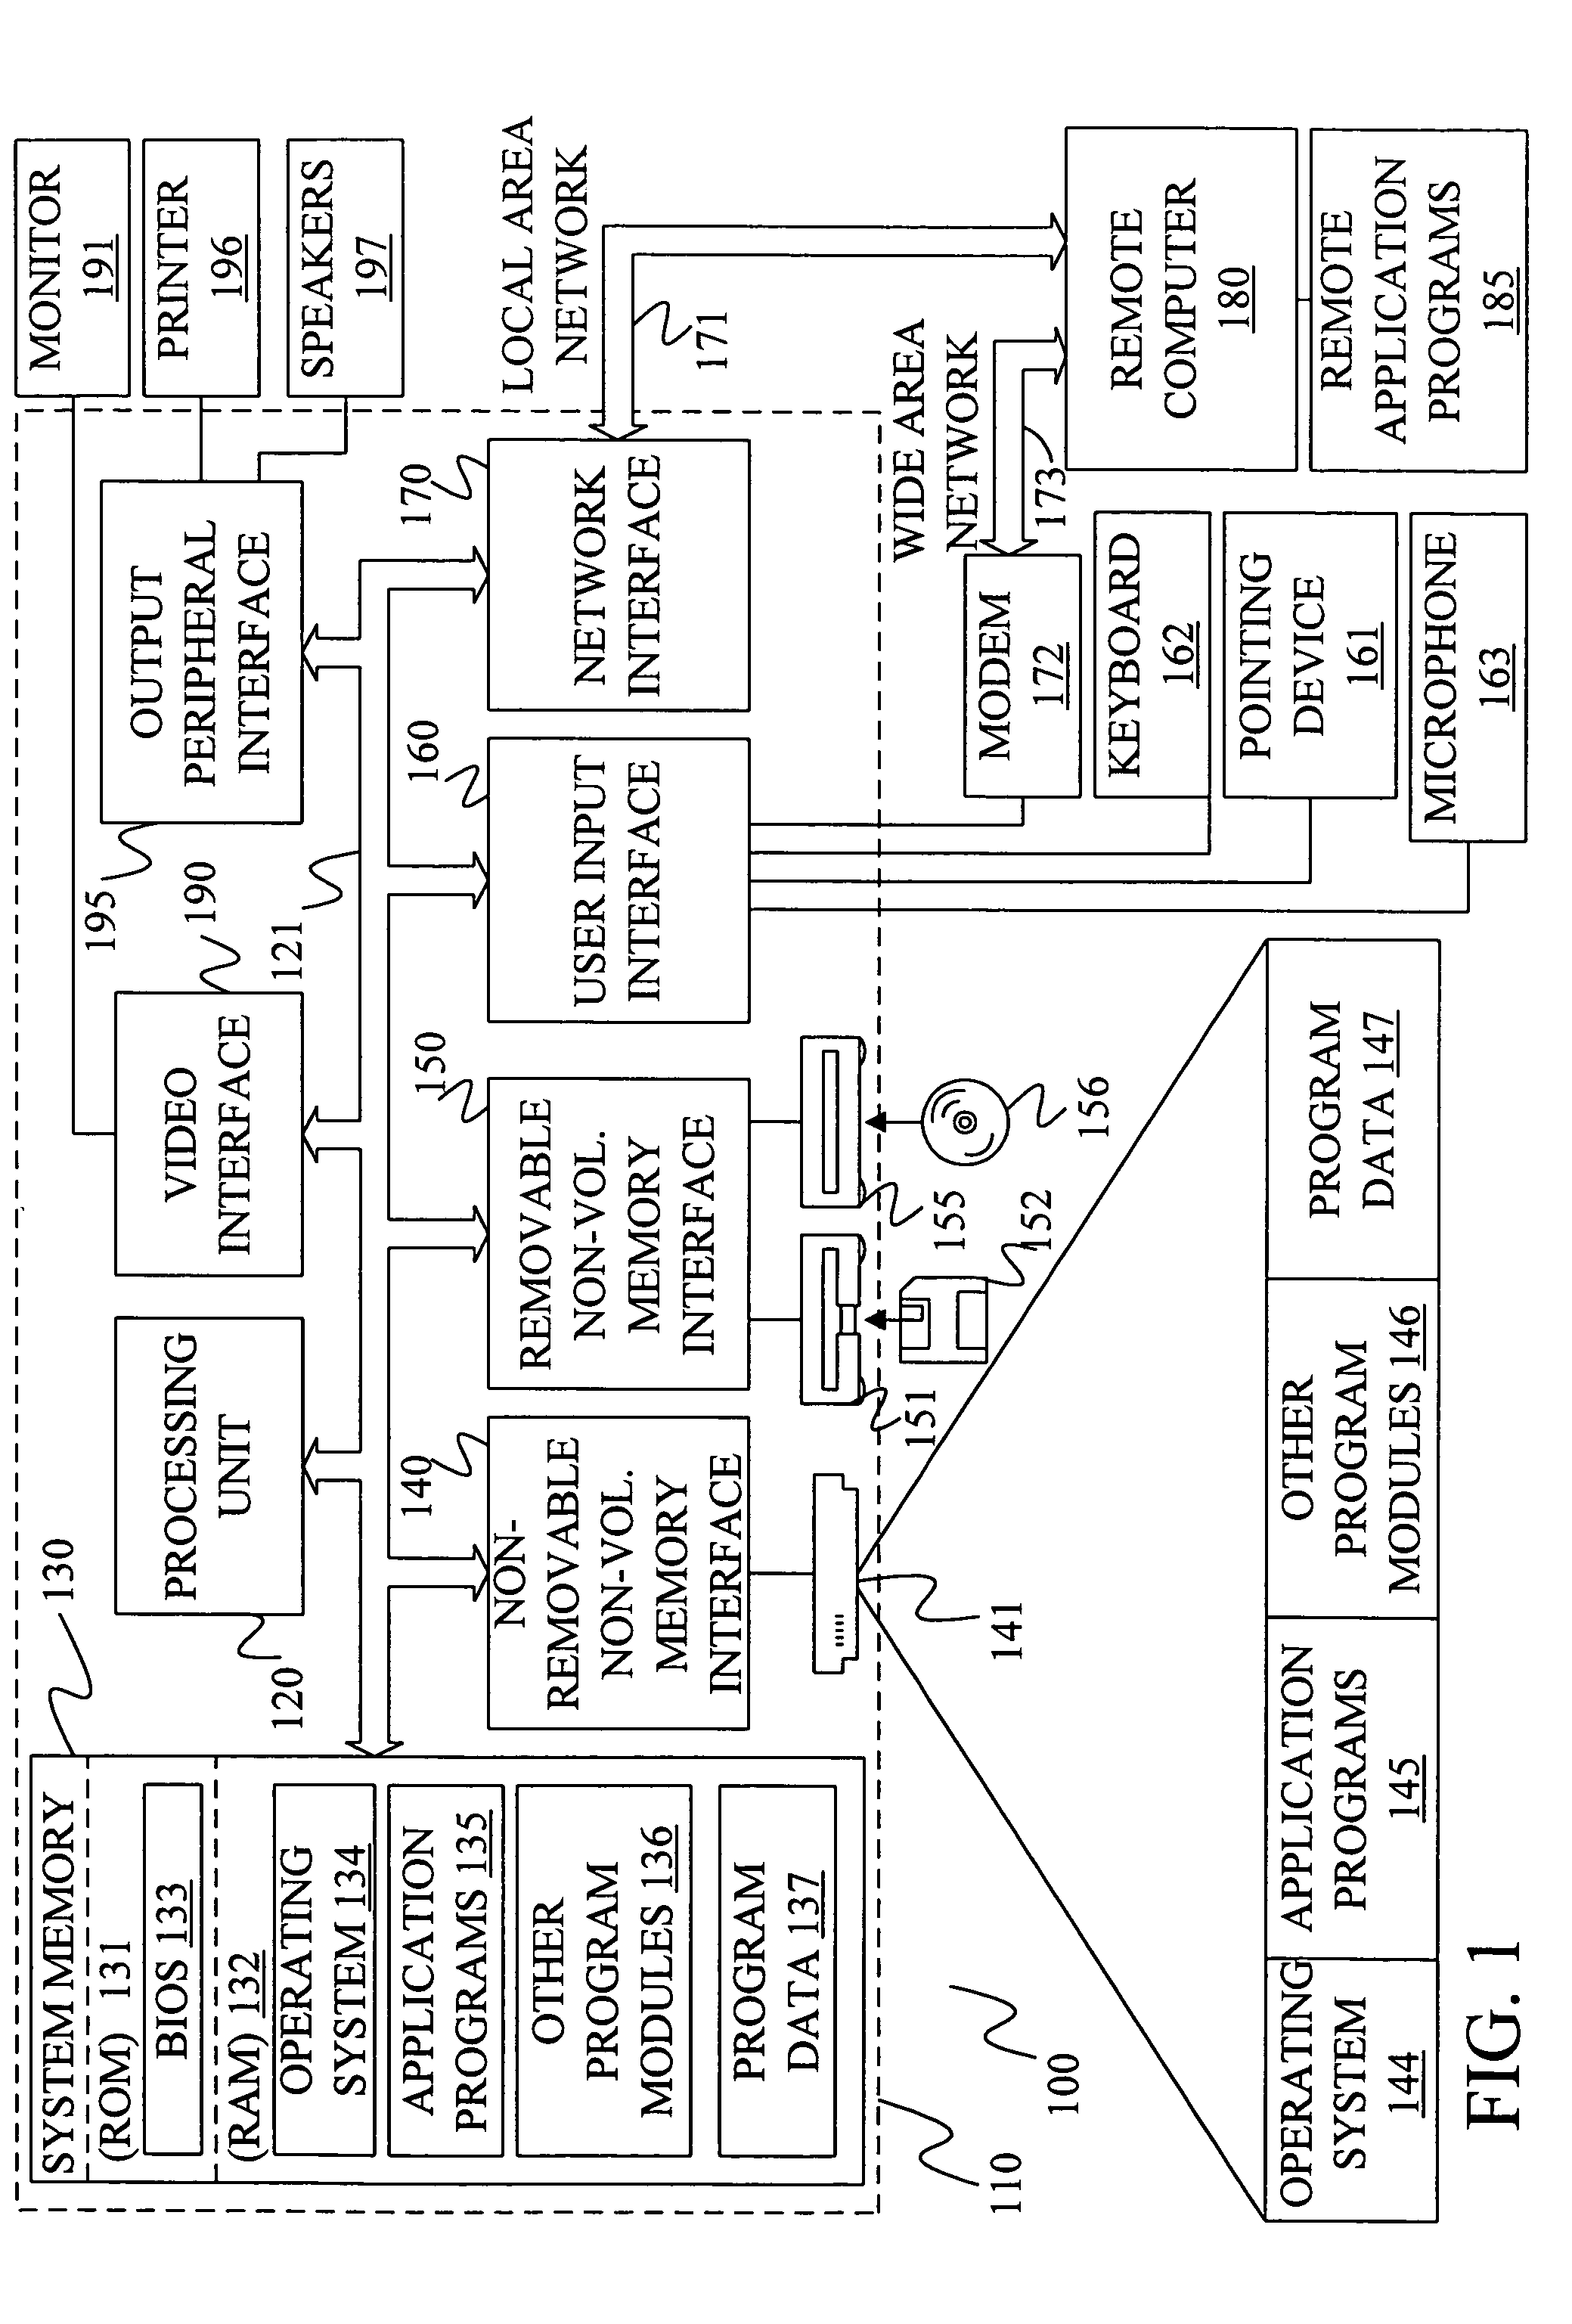 Method and apparatus for deriving logical relations from linguistic relations with multiple relevance ranking strategies for information retrieval